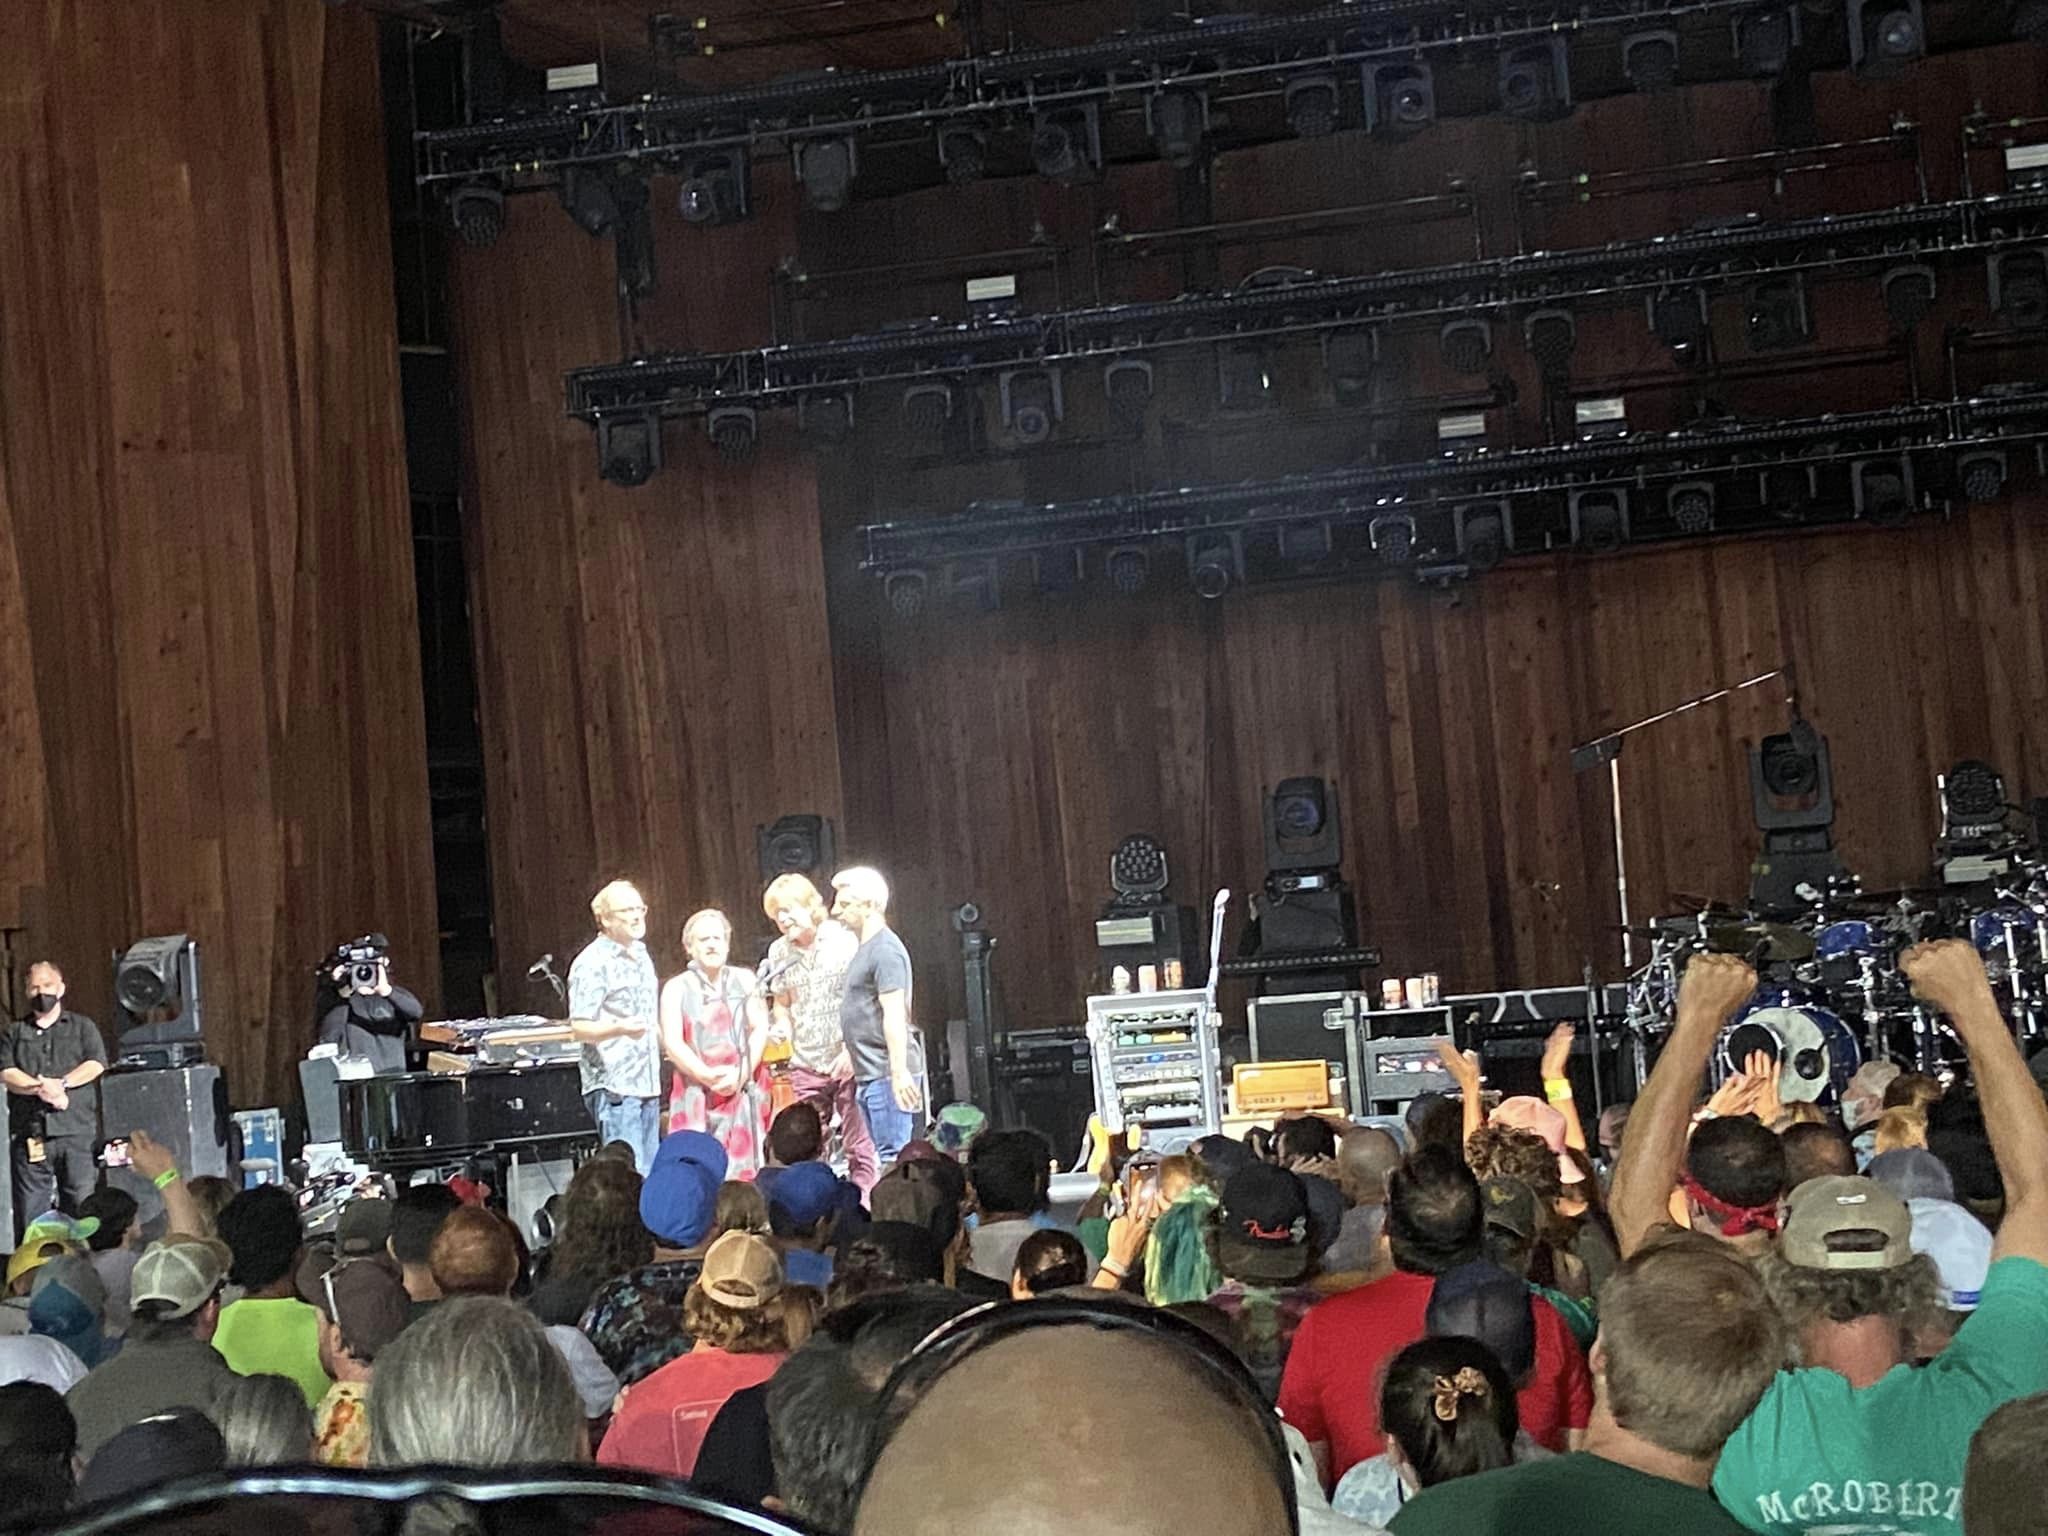 Phish singing a capella from a distance